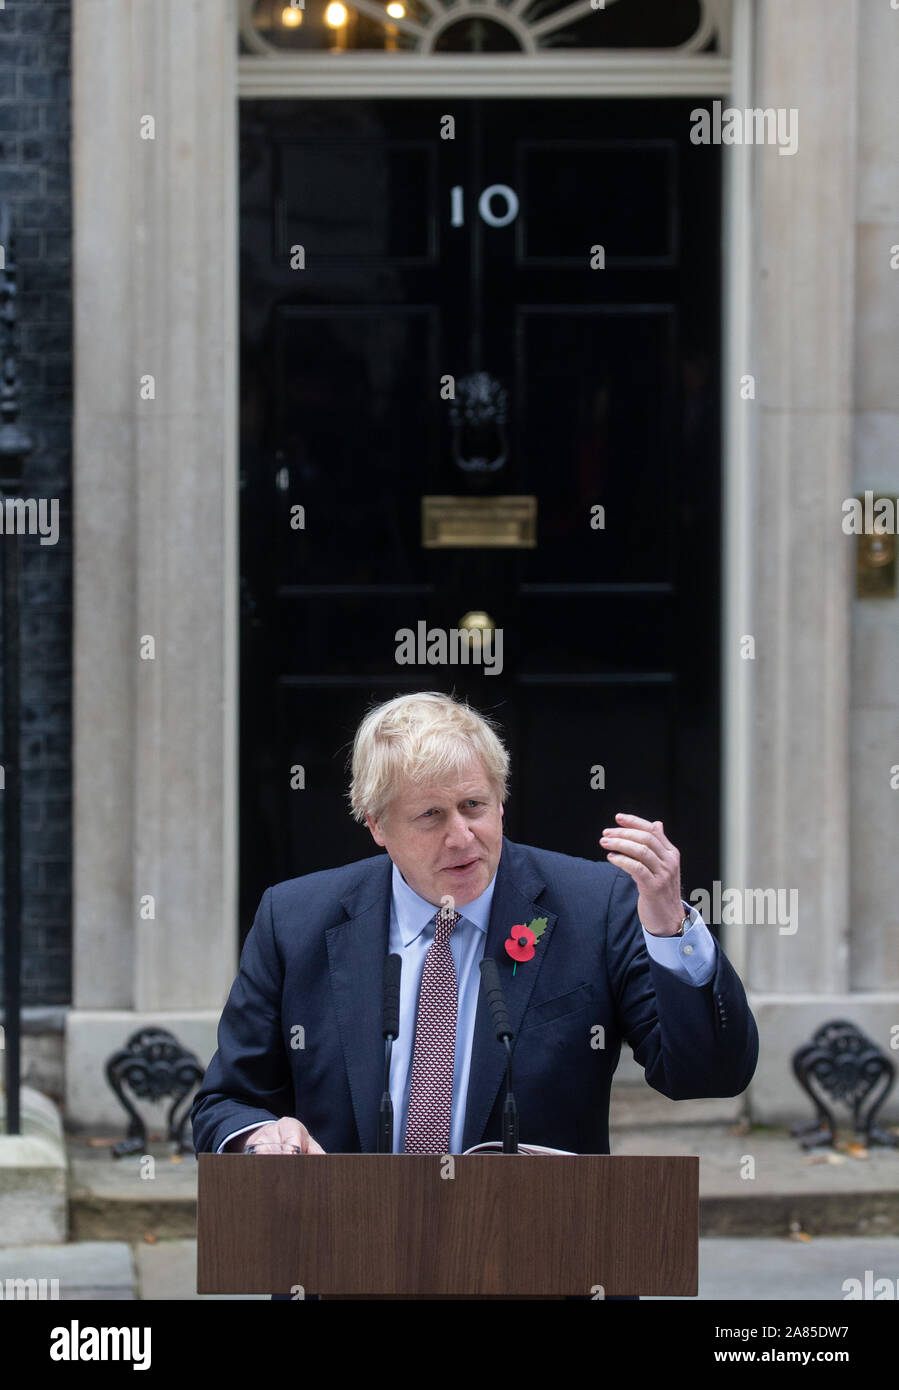 London, UK. 06th Nov, 2019. Prime Minister, Boris Johnson, delivers a statement in Downing Street ahead of 5 weeks of campaigning. Credit: Tommy London/Alamy Live News Stock Photo